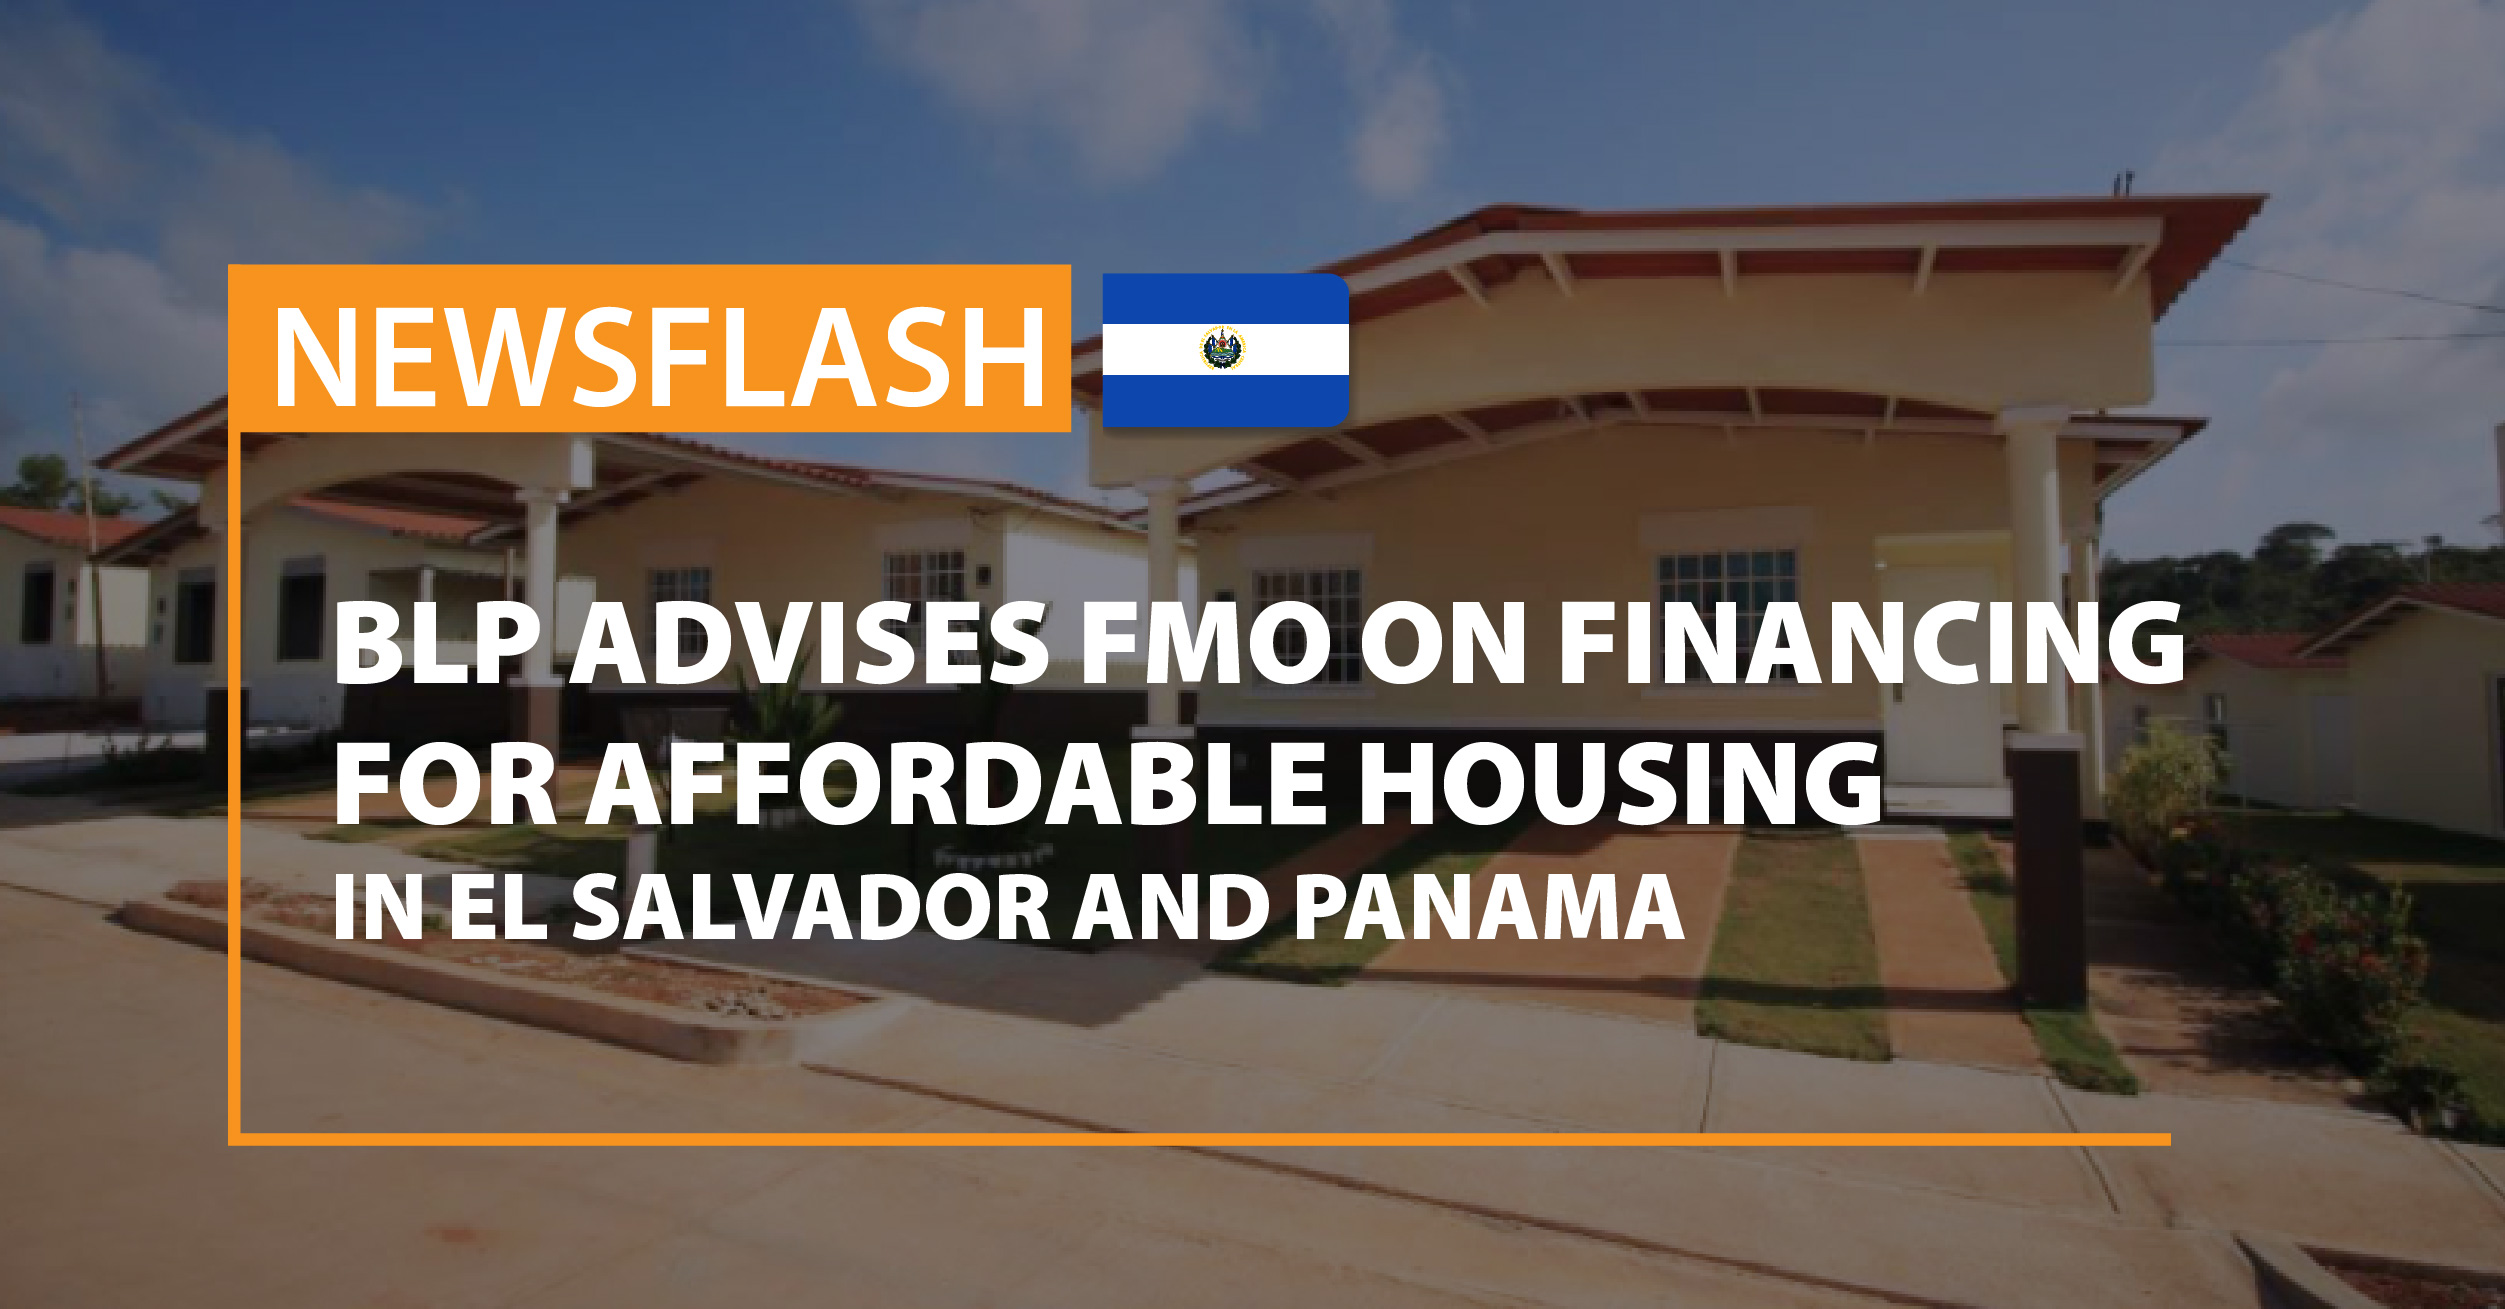 BLP advises FMO on financing for affordable housing in El Salvador and Panama.